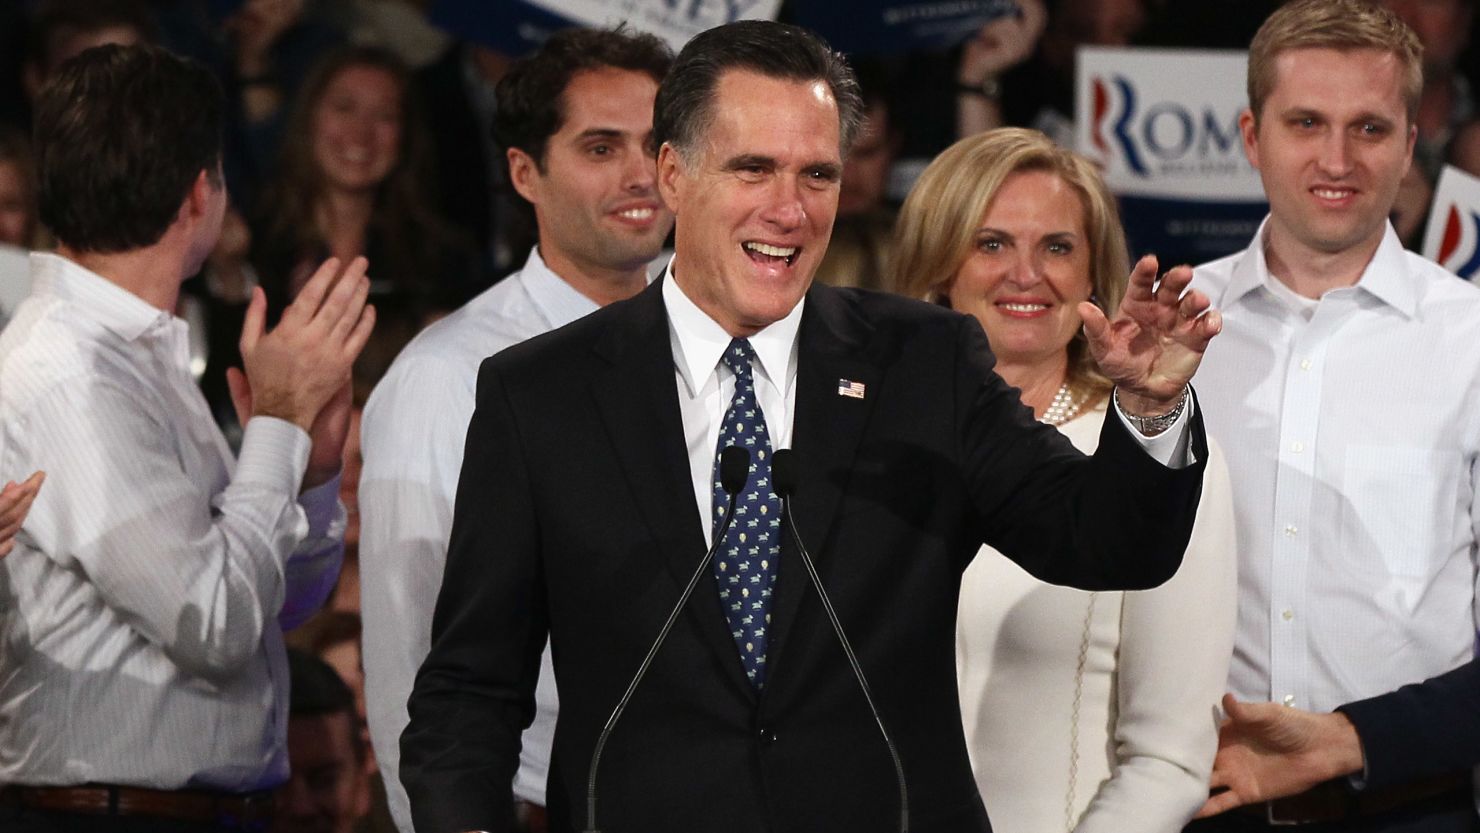 Romney’s plan would shred safety net for poor | CNN